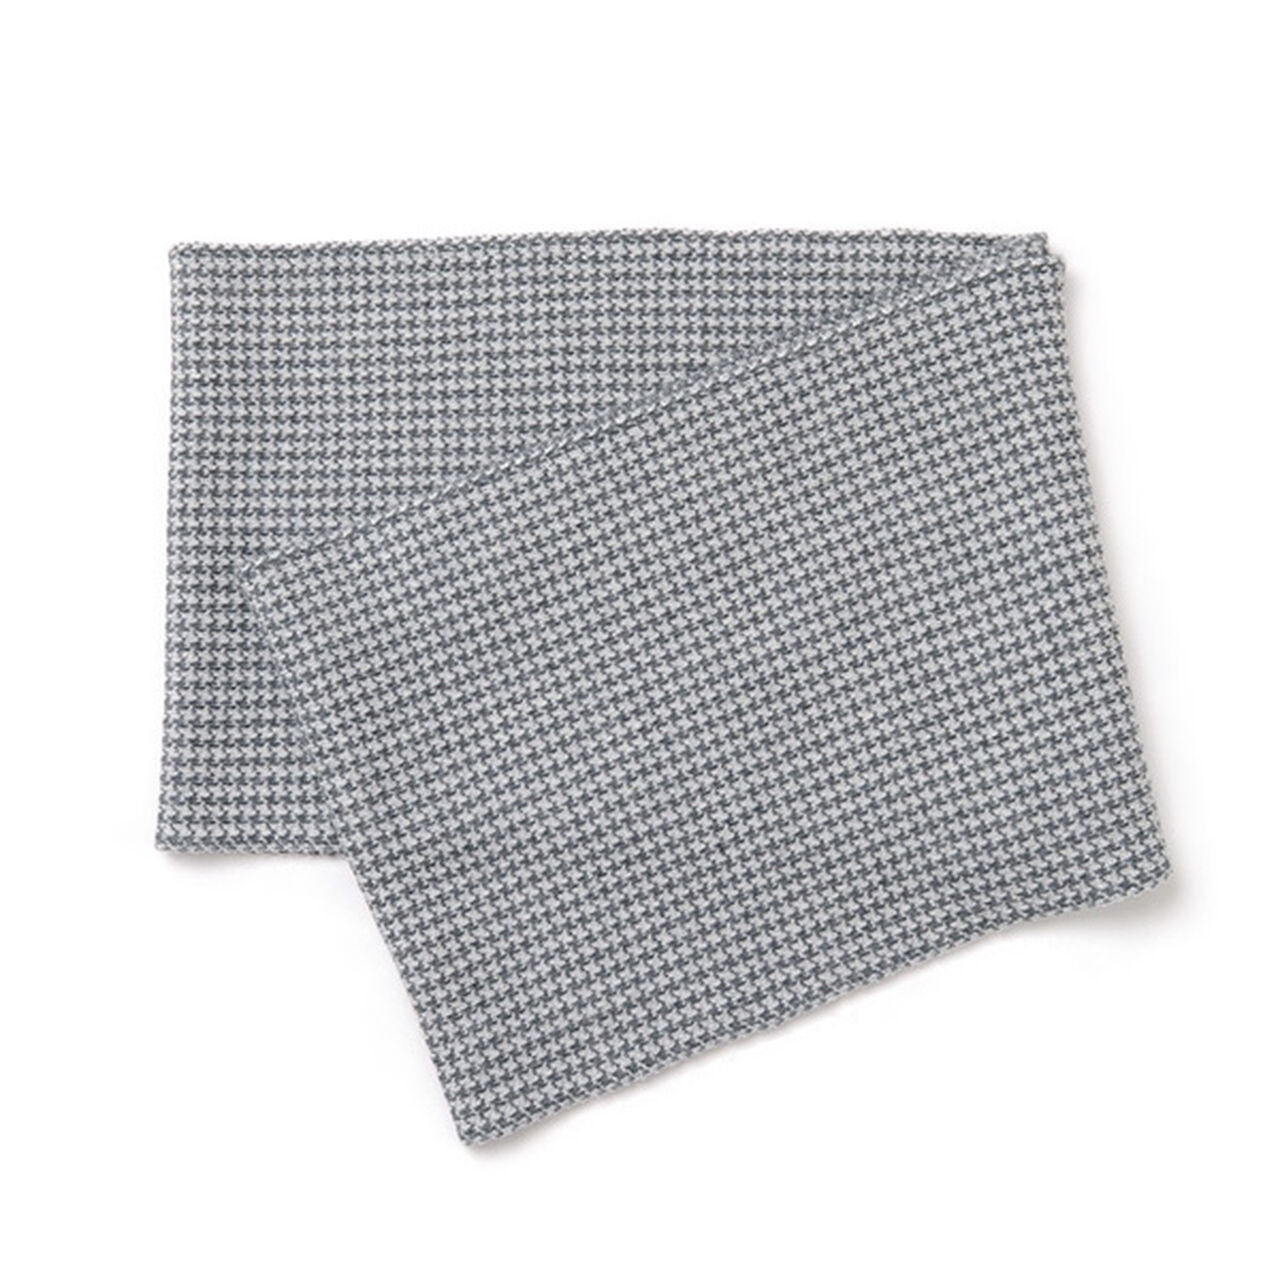 Staggered Check Merino Wool Snood,LightGrey_Silver, large image number 0